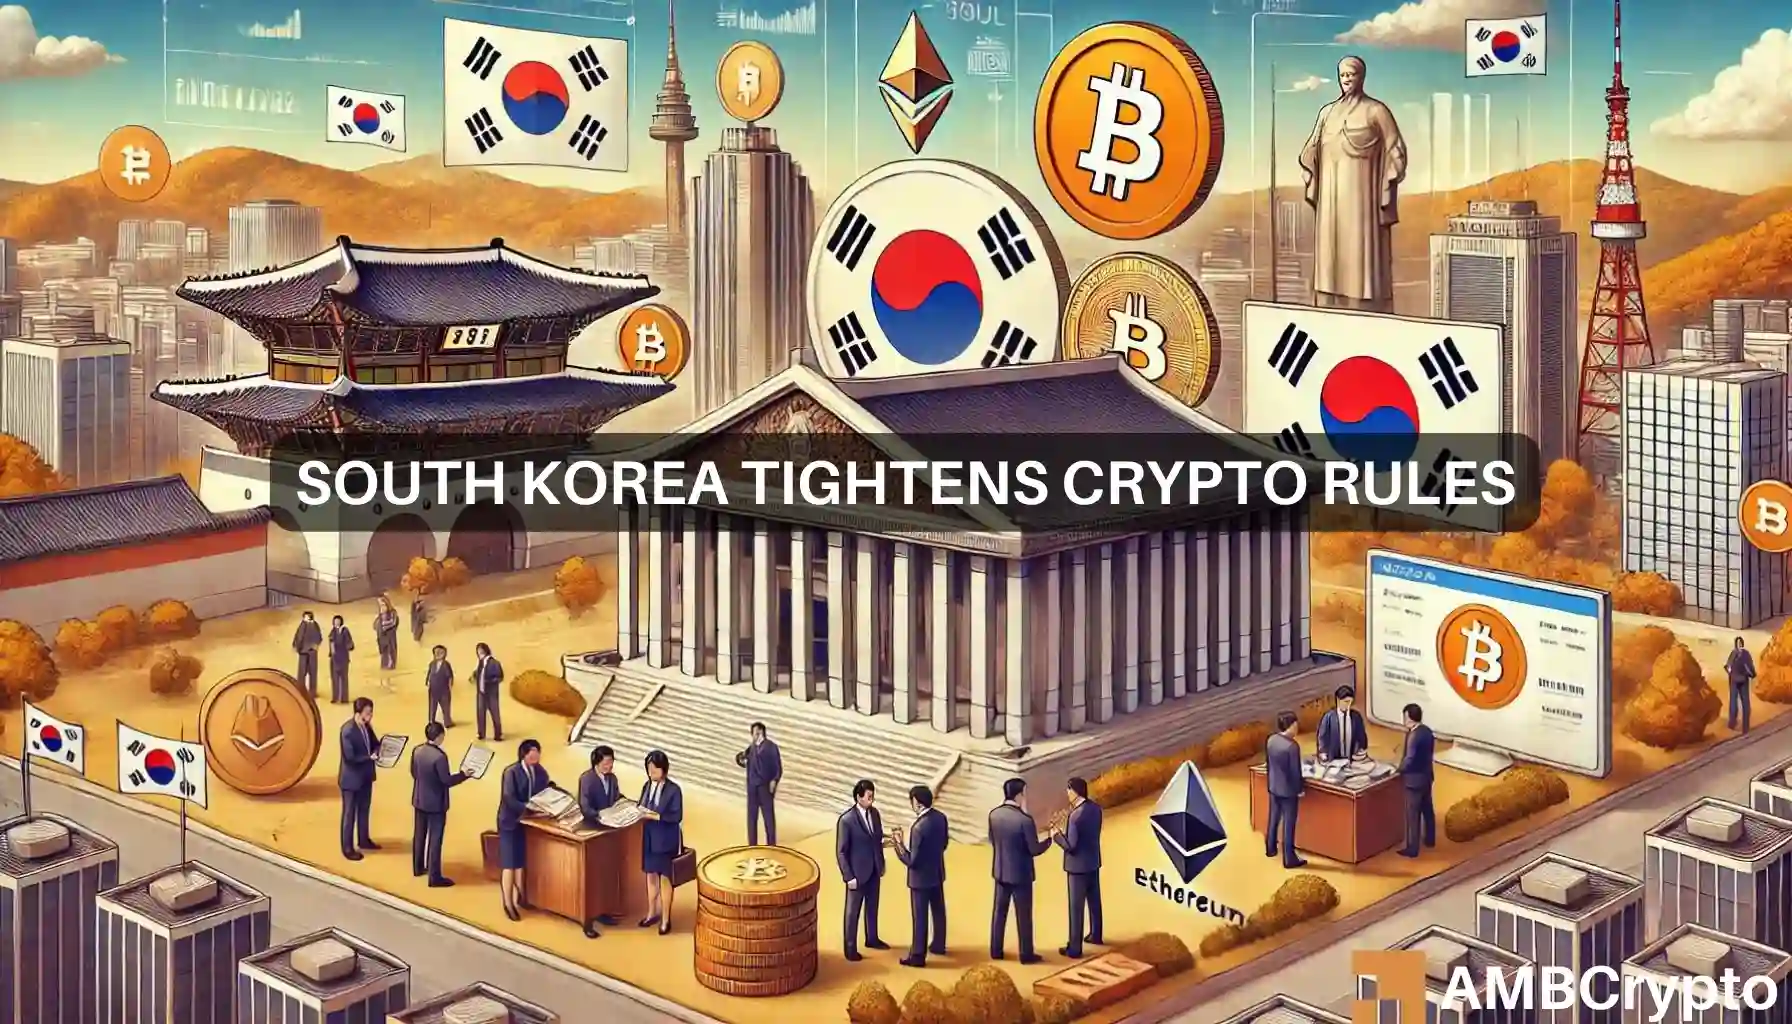 South Korea implements new crypto regulations, details here